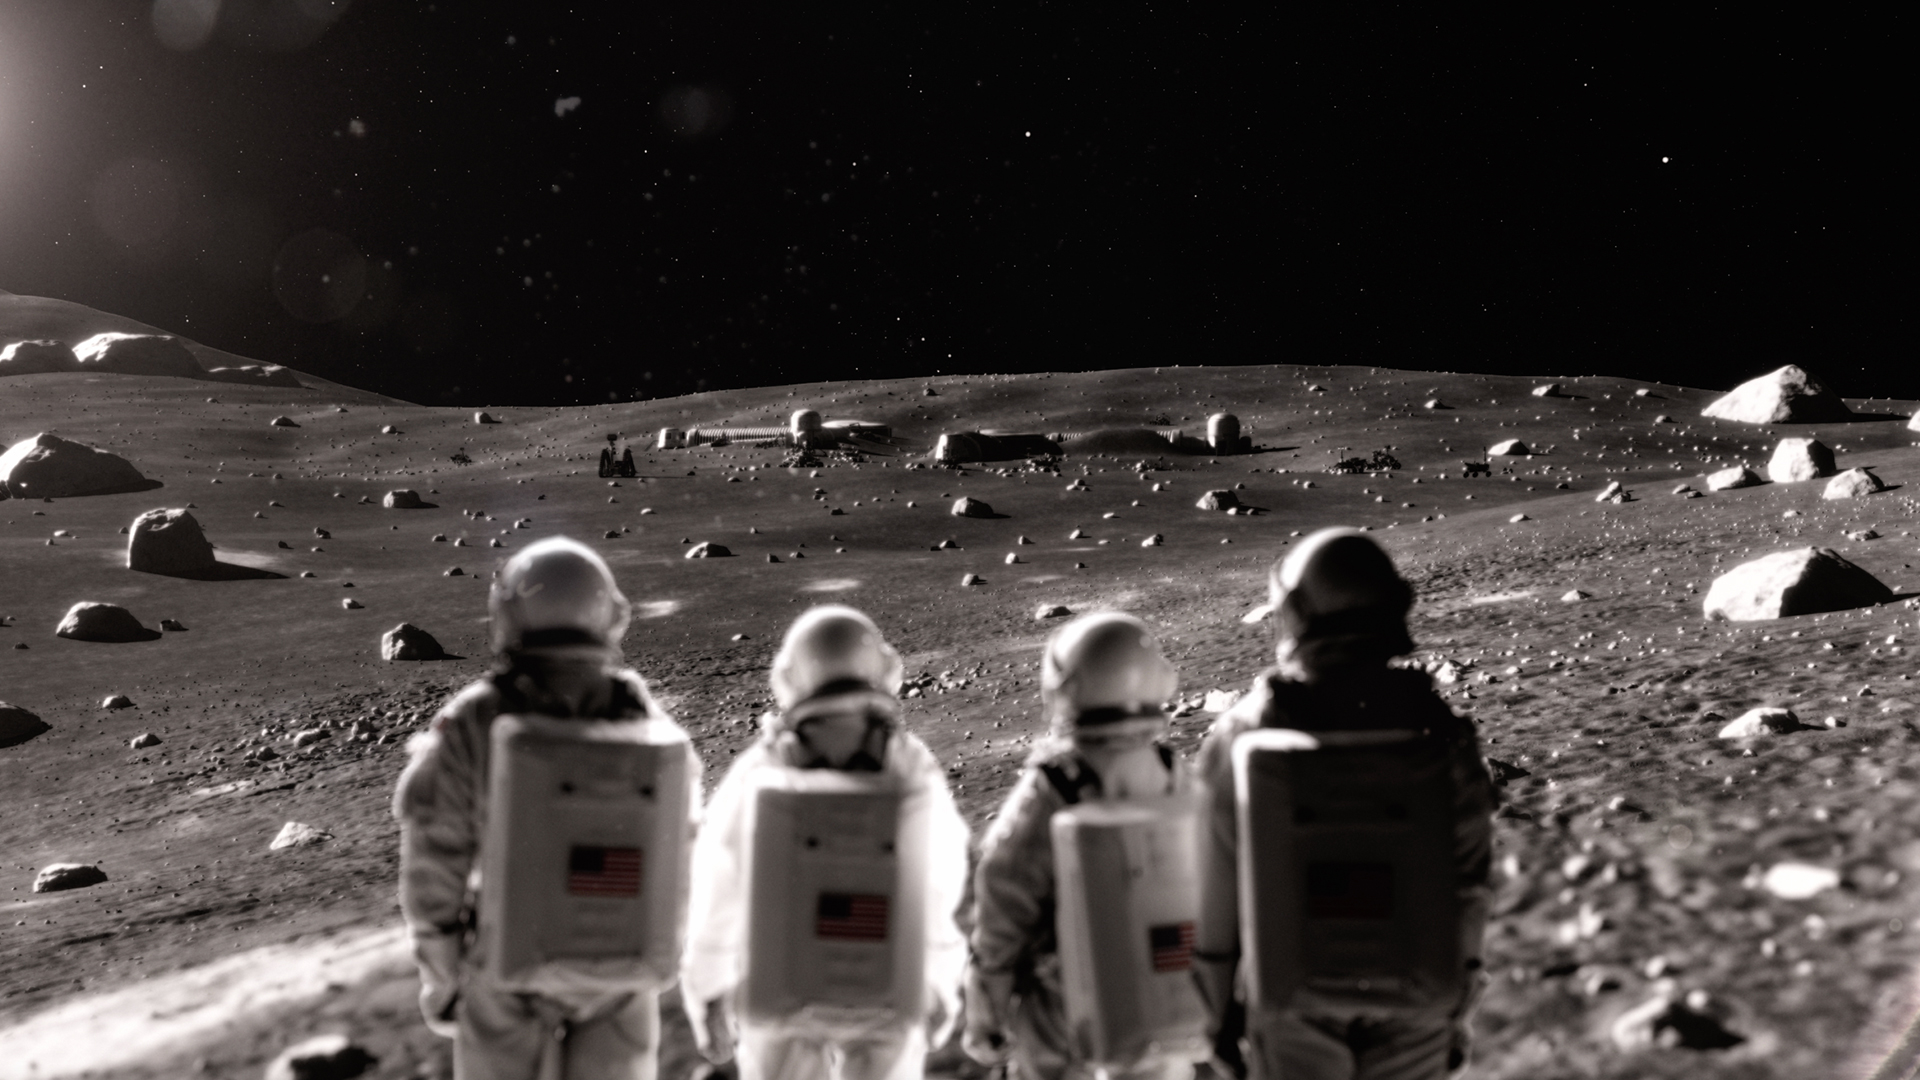 StarHub celebrates the 50th anniversary of the Apollo 11 Moon Landing with an exciting line-up of programmes - Alvinology